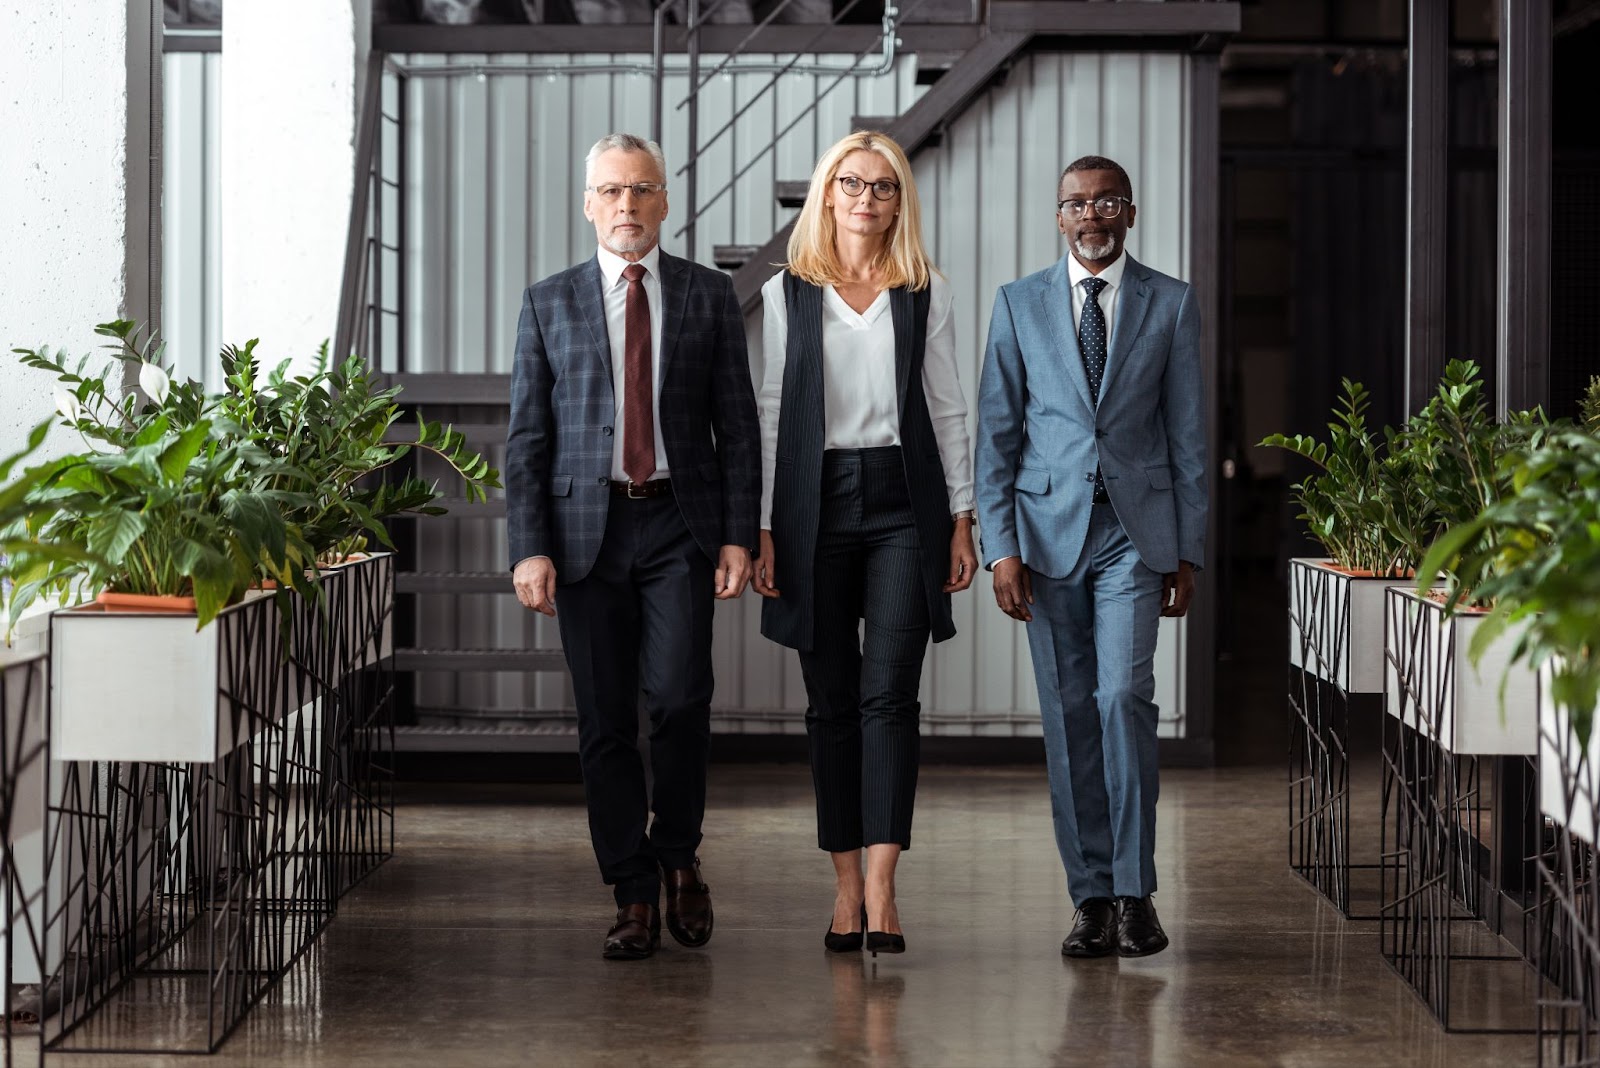 A businesswoman, along with two partners, walks into the office